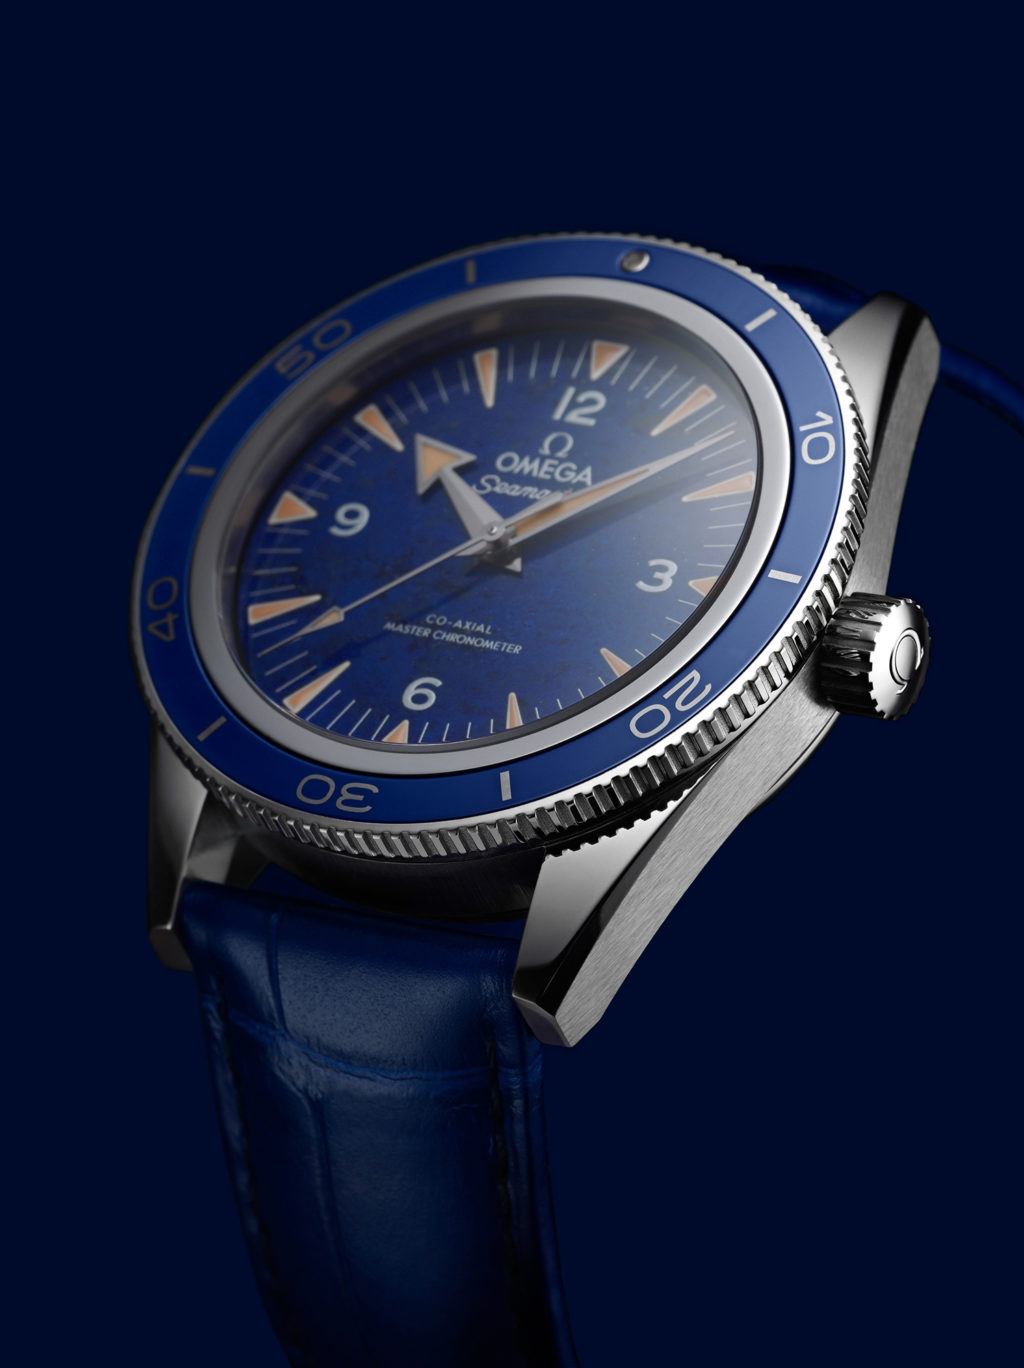 Jewels of the Sea: Omega Unveils Seamaster 300 Models with Mineral ...